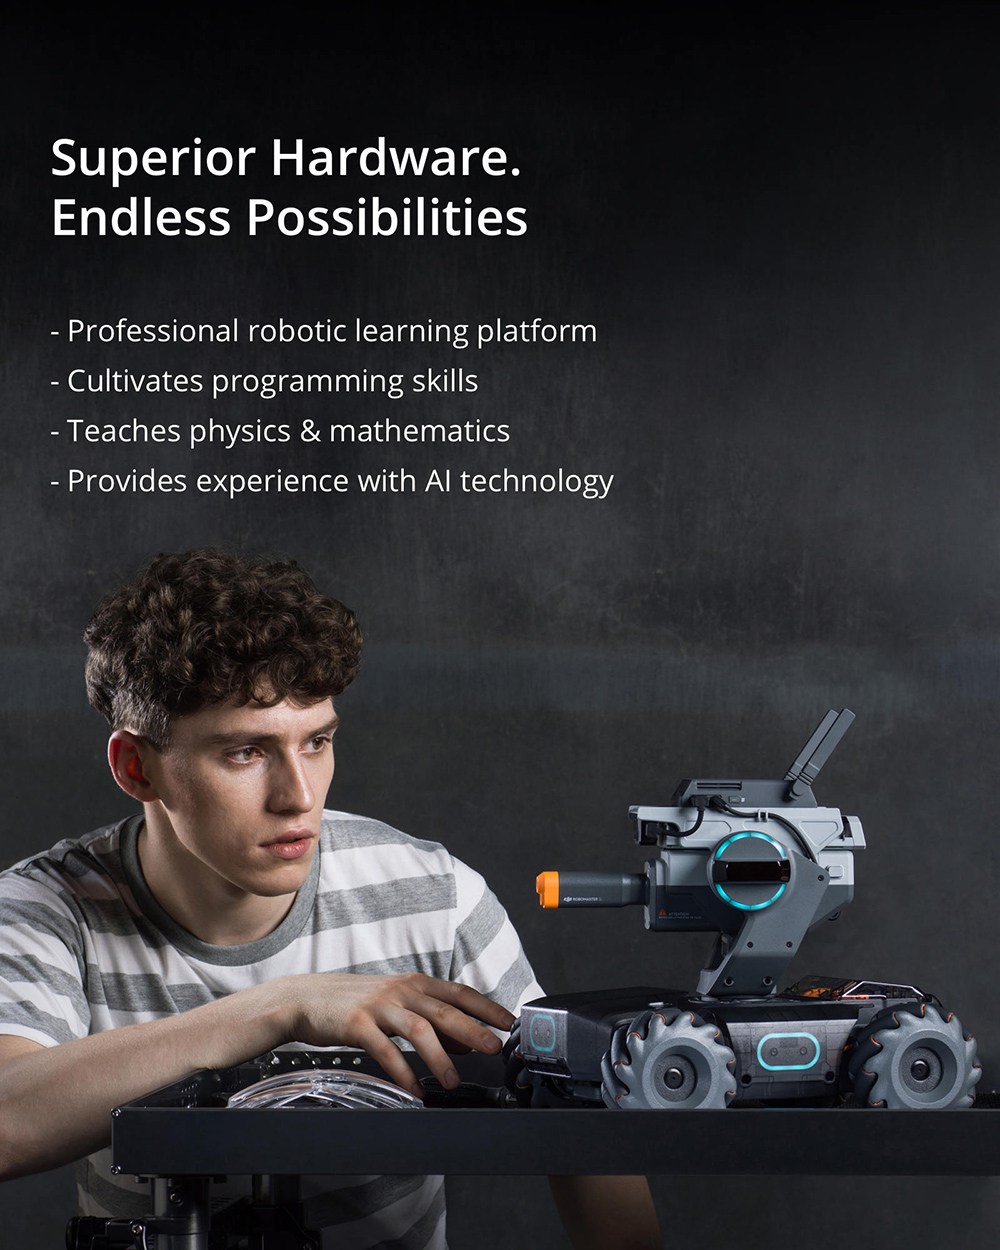 DJI Robomaster S1 STEAM DIY 4WD Brushless HD FPV APP Control Intelligent Educational Robot With AI Modules Support Scratch 3.0 Python Program - Photo: 2